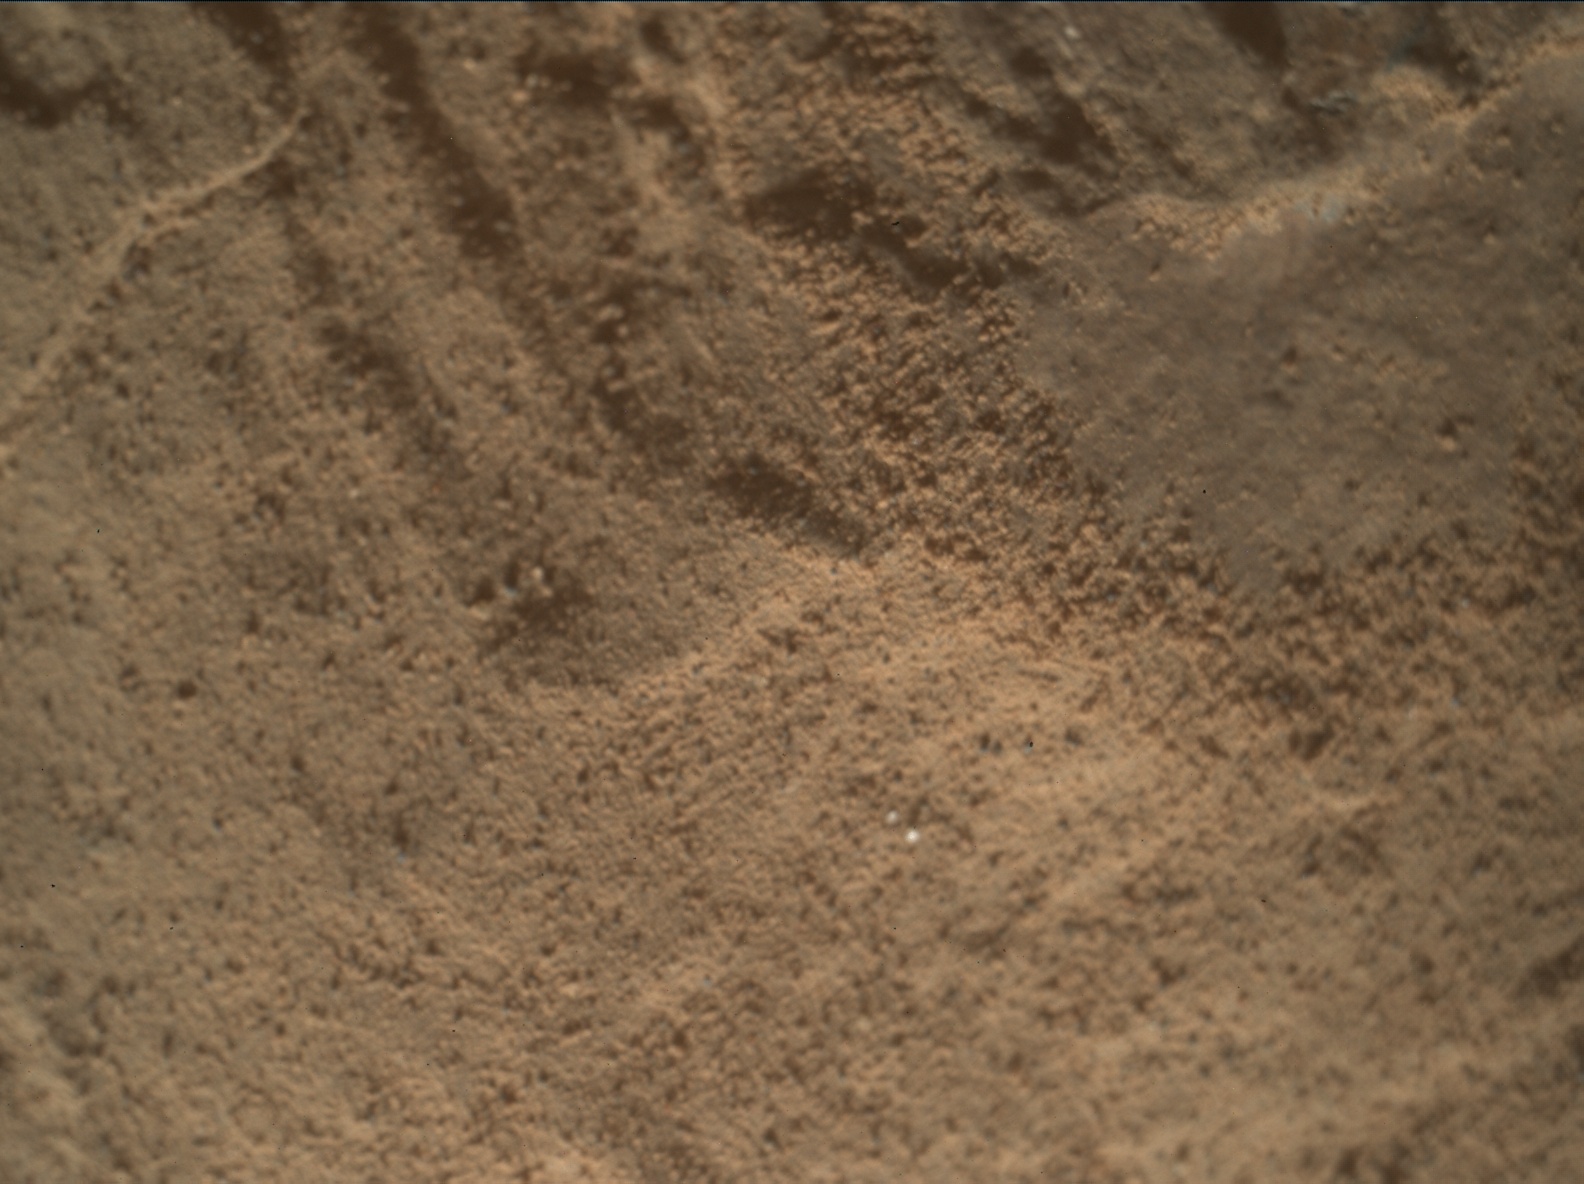 Nasa's Mars rover Curiosity acquired this image using its Mars Hand Lens Imager (MAHLI) on Sol 2601